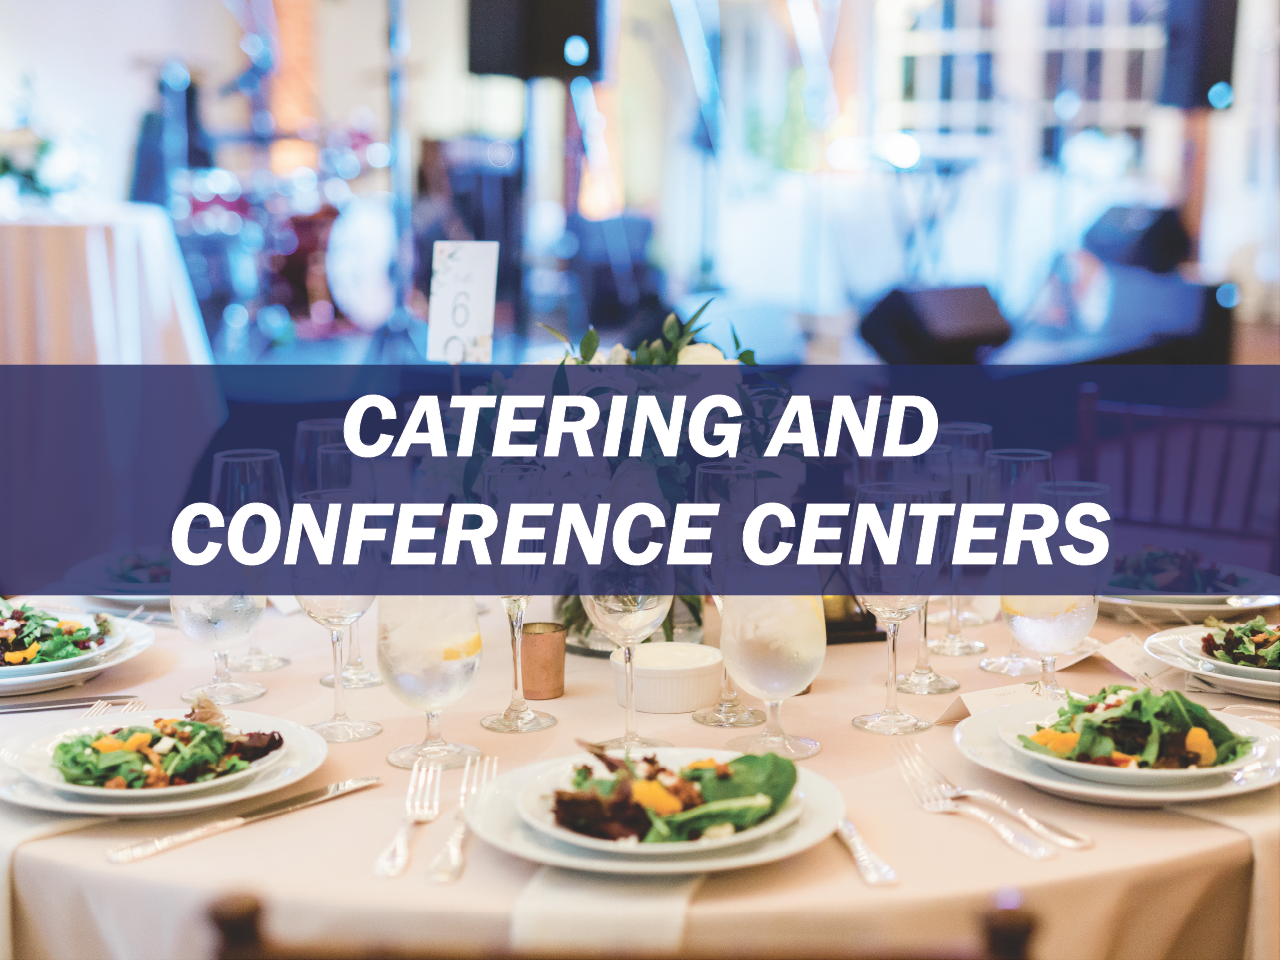 Catering & Conference Centers Survey